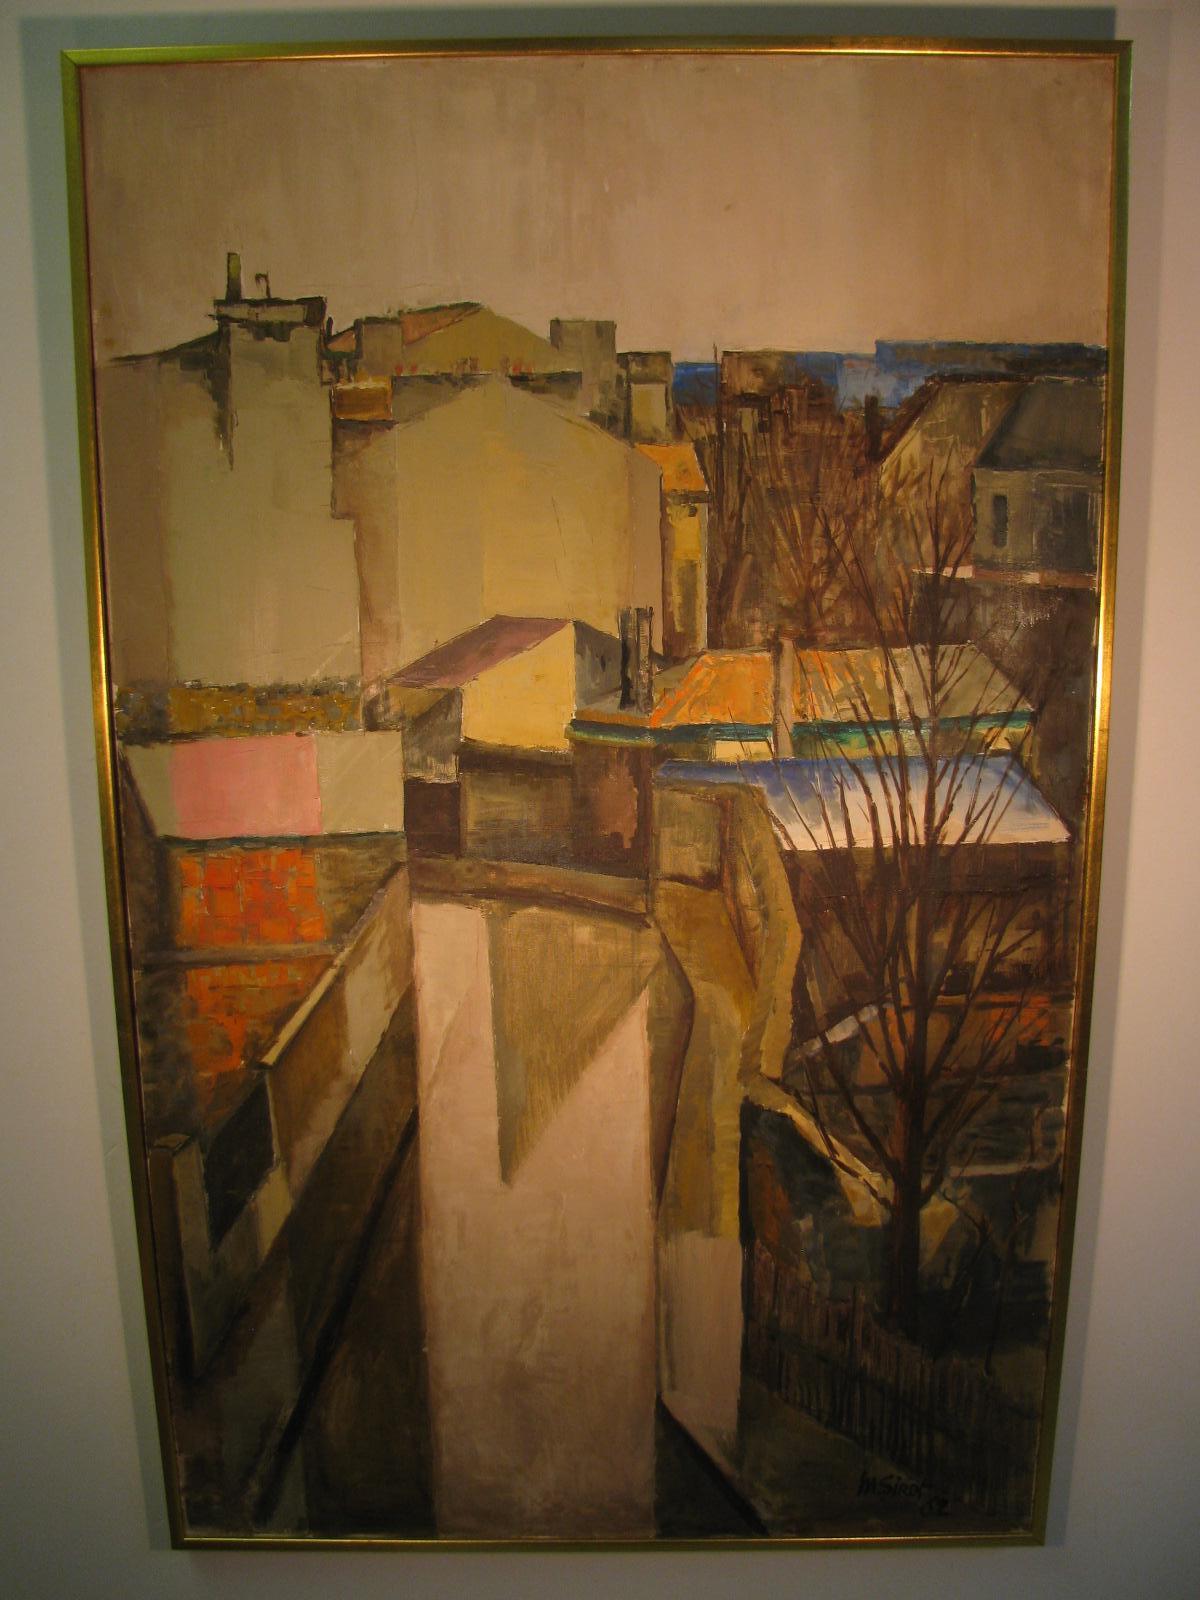 Beautiful abstract view from the rooftops of Paris, La rue Mouillee. Purchased at an art fair, Salon Des Independents 1962. Very serene, the colors are fabulous and keep you immersed. Size given is including the frame which is a period midcentury